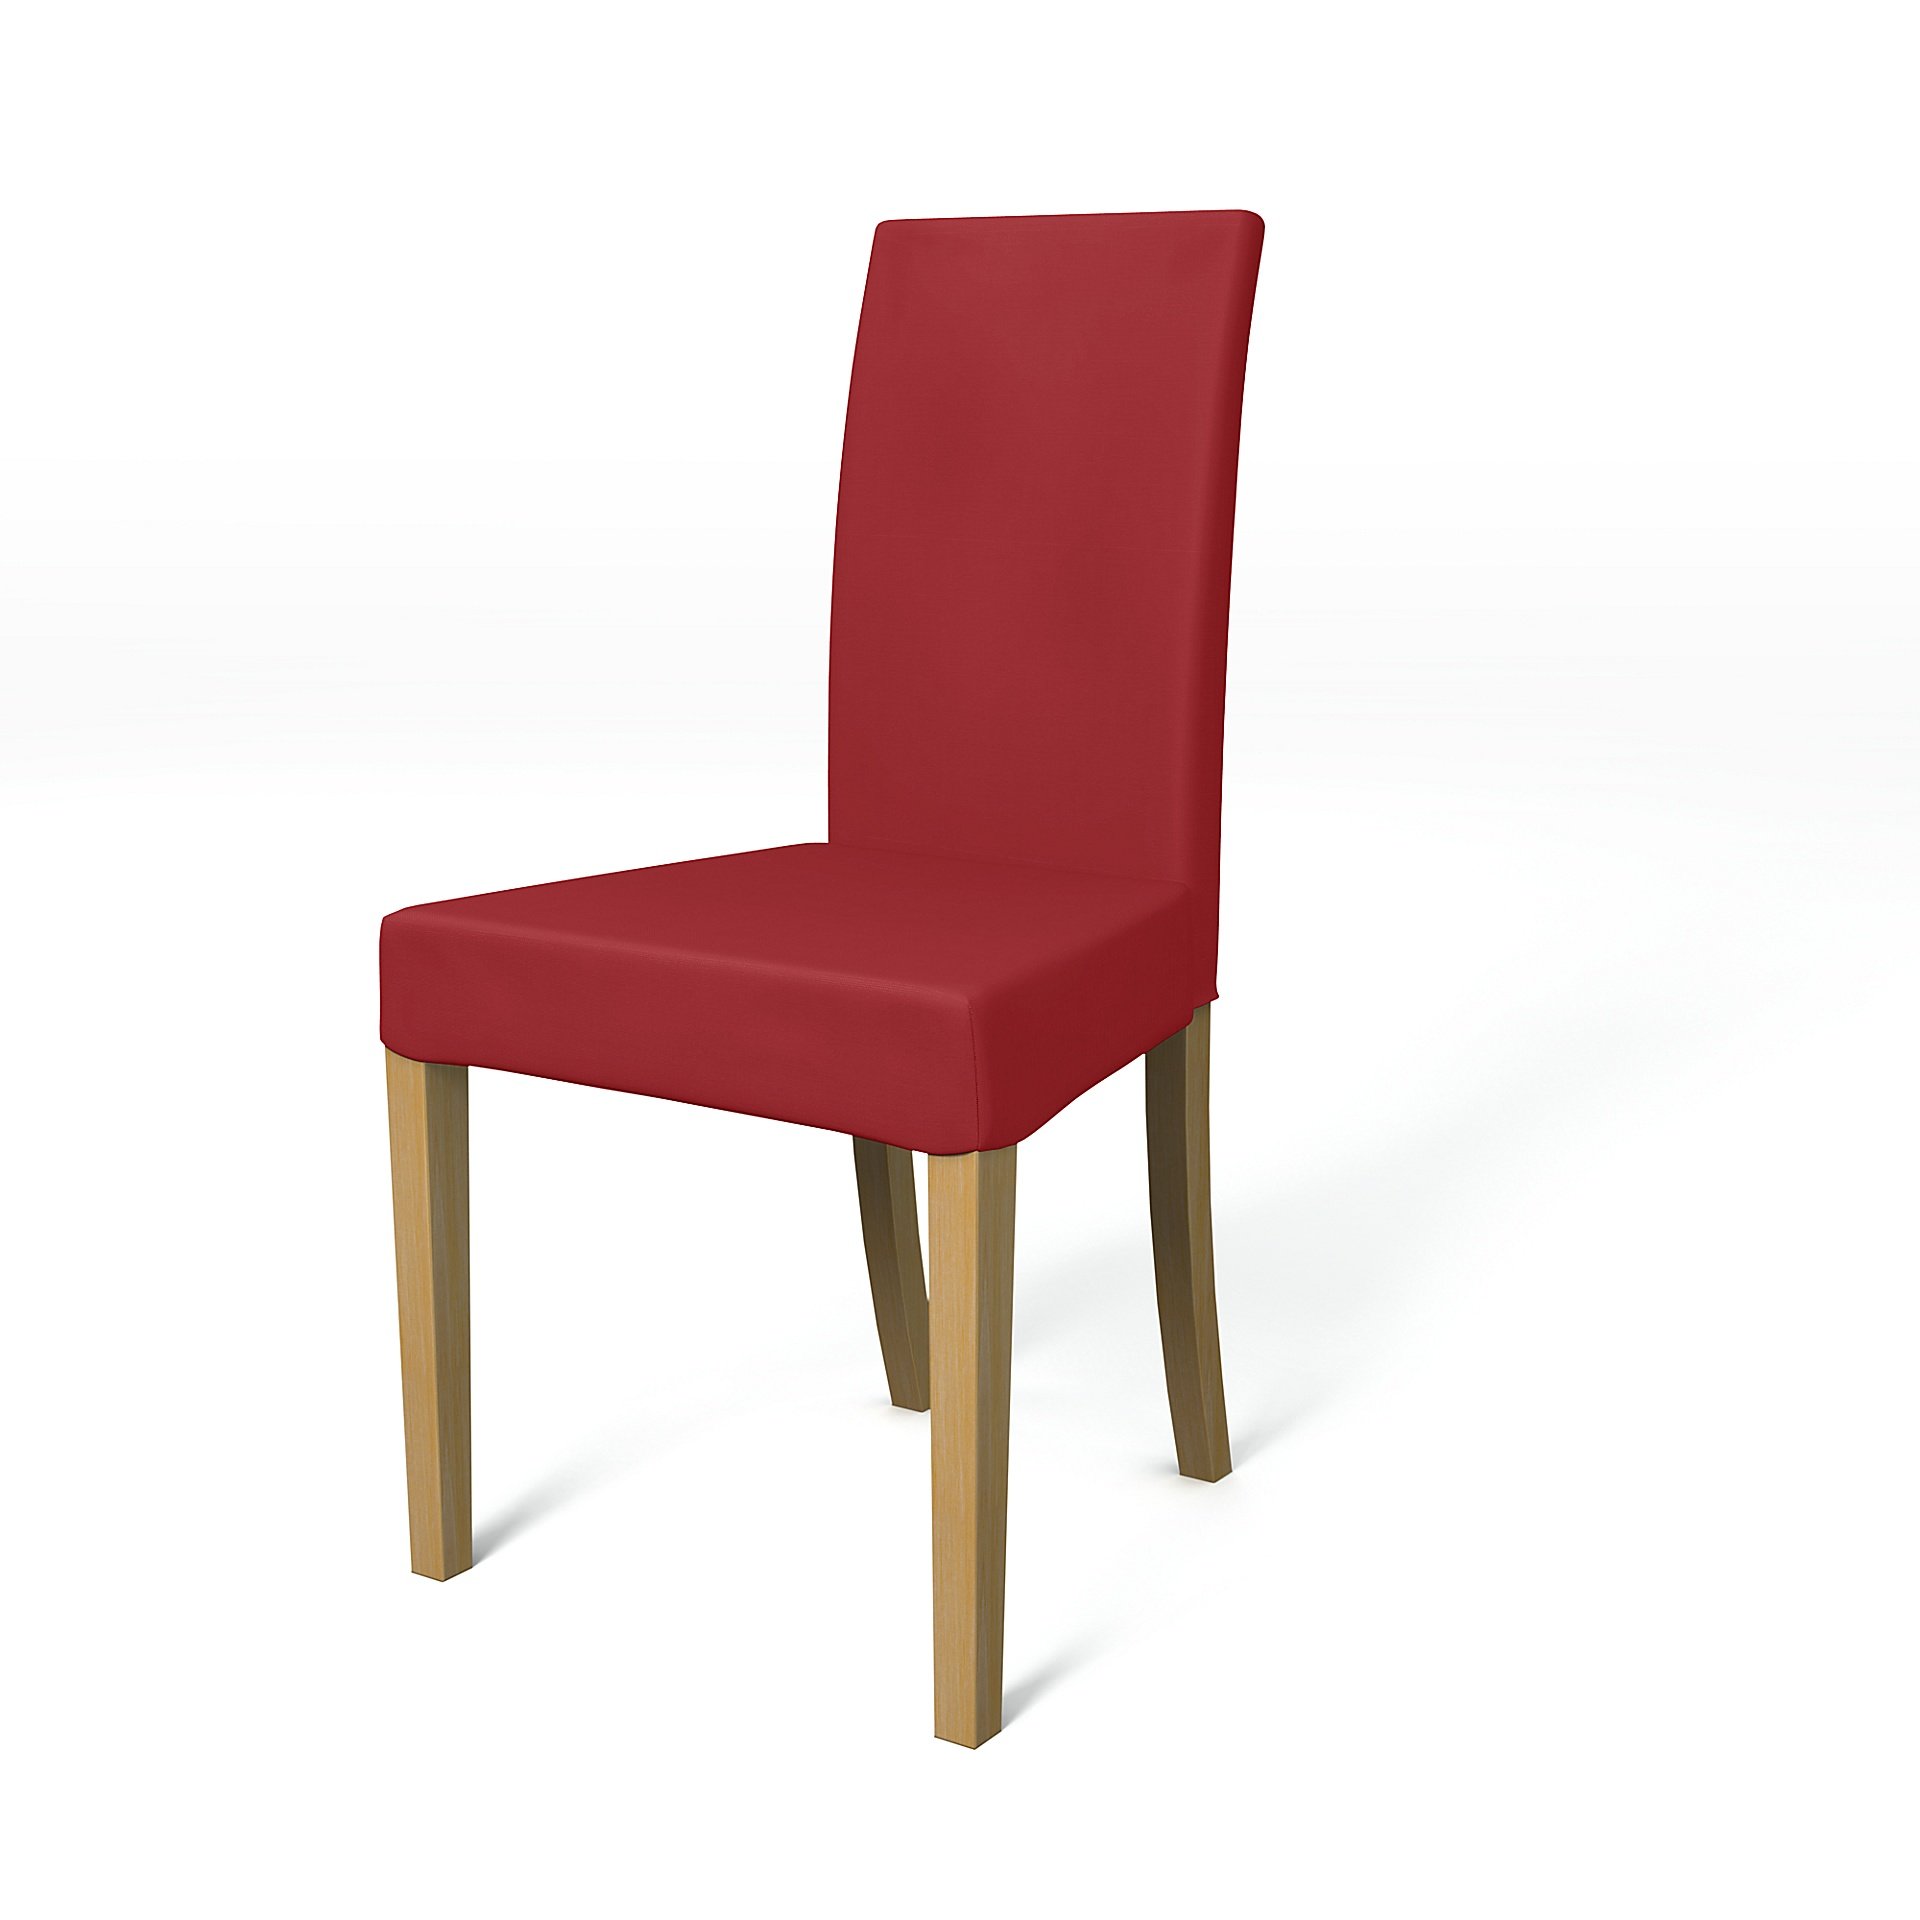 IKEA - Harry Dining Chair Cover, Scarlet Red, Cotton - Bemz